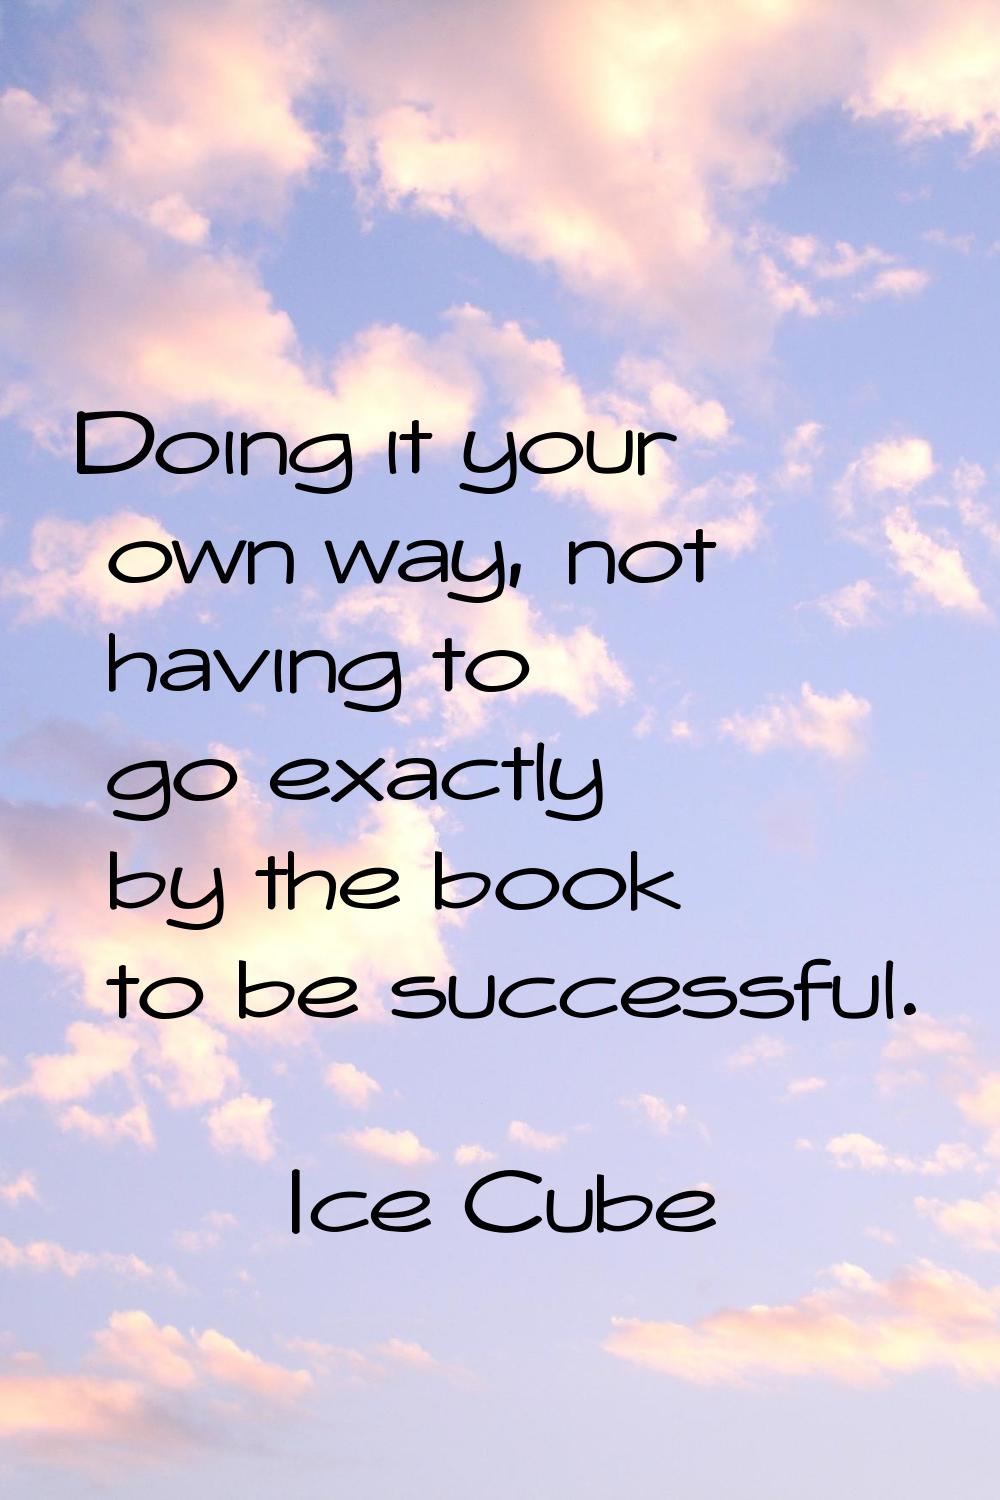 Doing it your own way, not having to go exactly by the book to be successful.